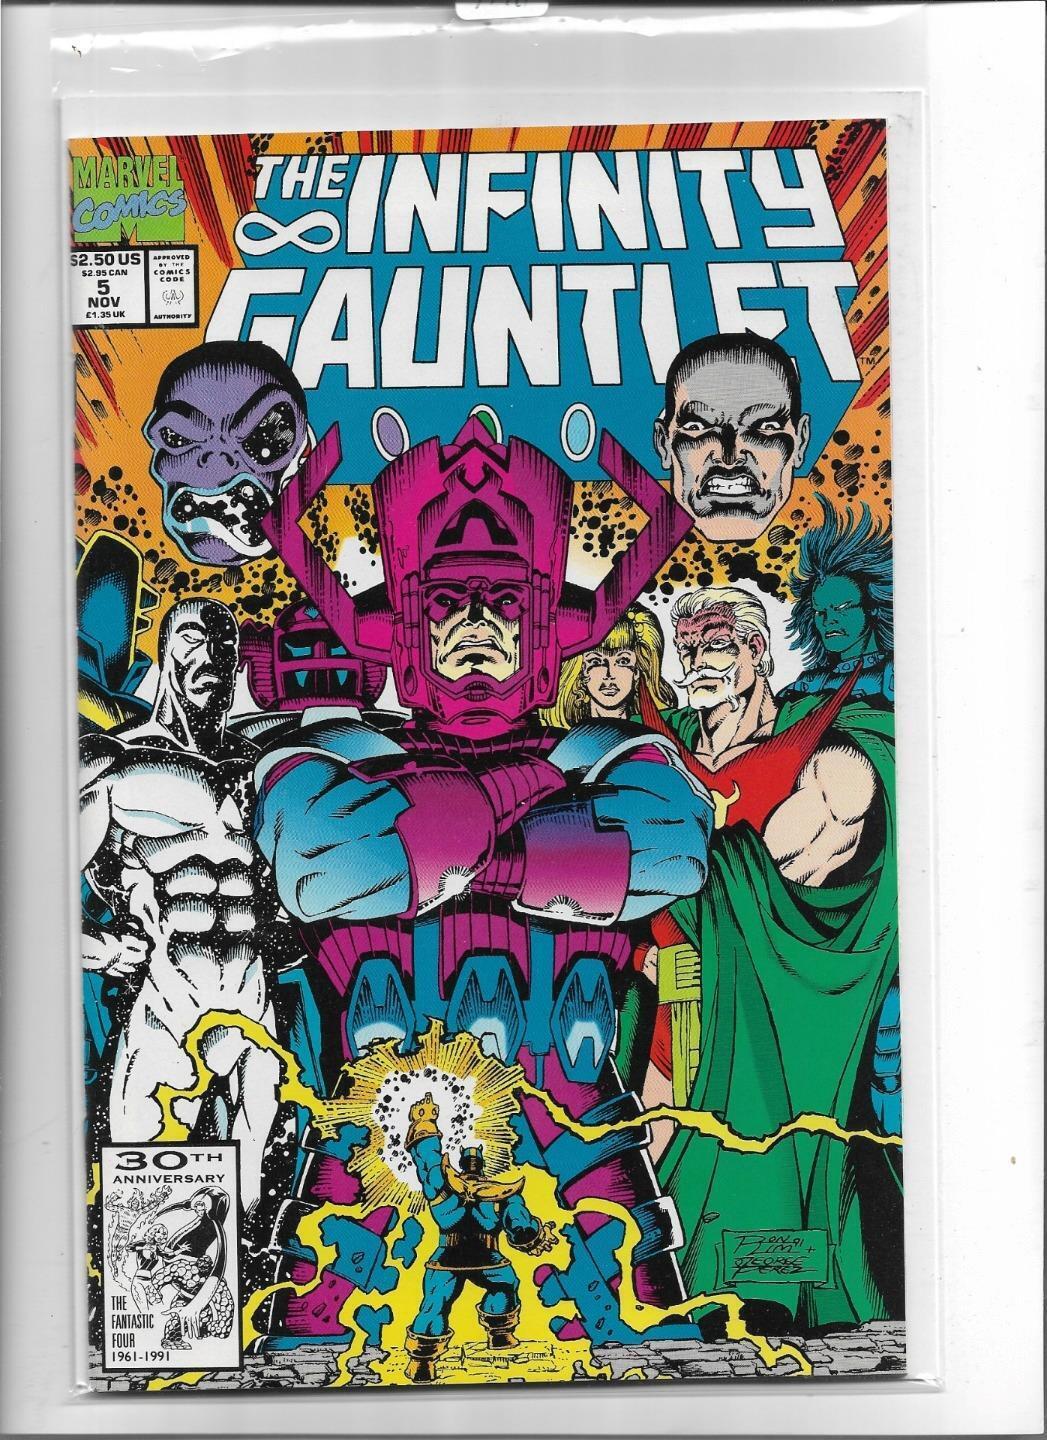 THE INFINITY GAUNTLET #5 1991 NEAR MINT 9.4 3770 THANOS GALACTUS SILVER SURFER